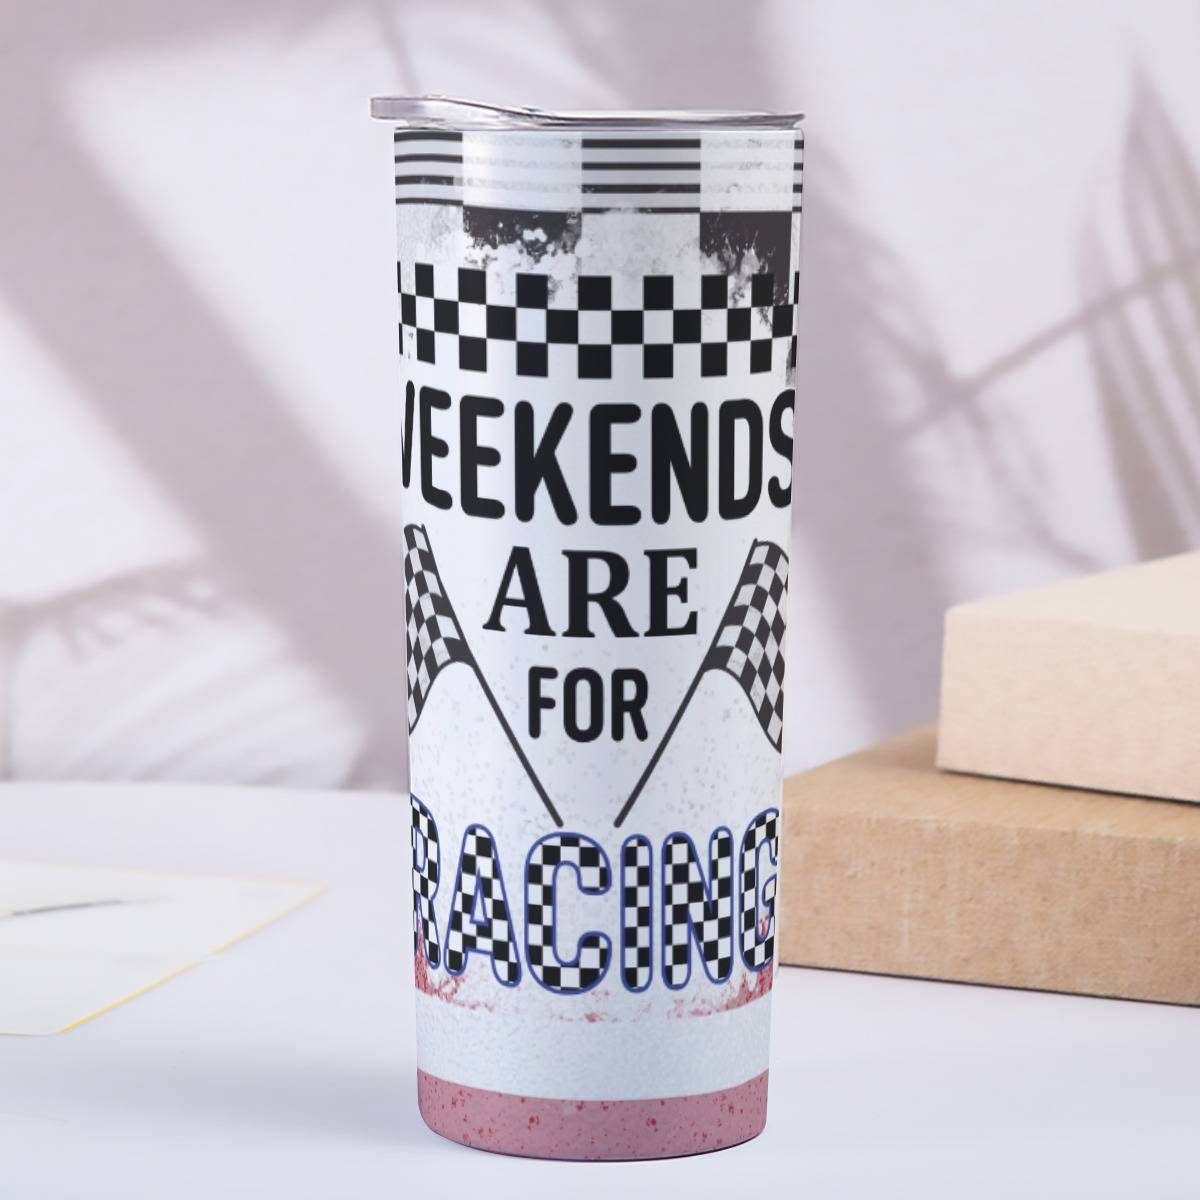 Weekends Are For Racing 20oz Tall Skinny Tumbler with Lid and Straw